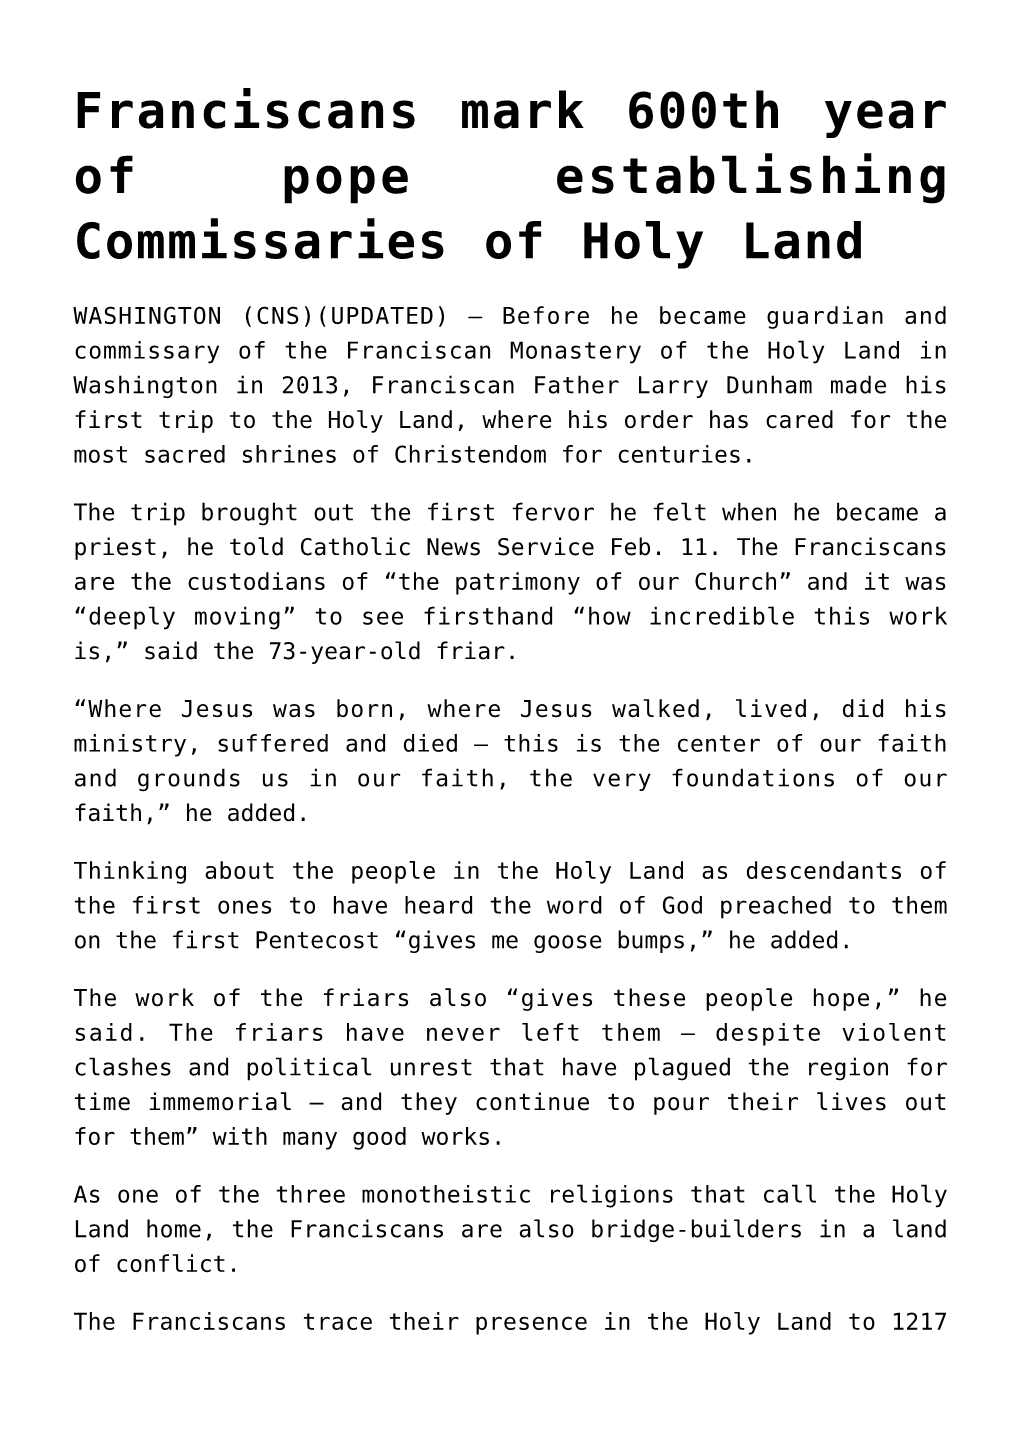 Franciscans Mark 600Th Year of Pope Establishing Commissaries of Holy Land